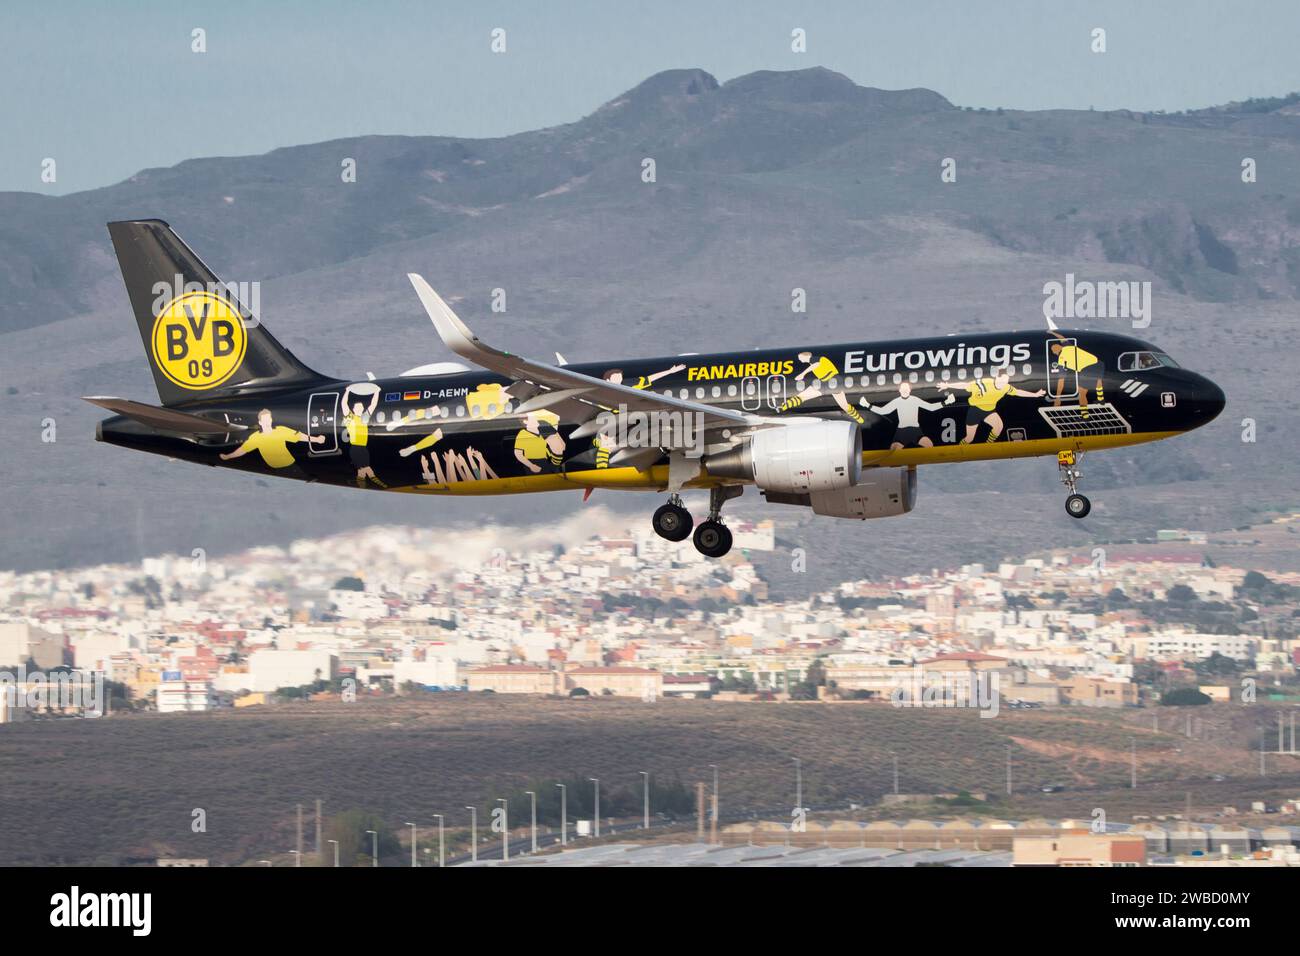 Airbus A320 airliner of the Eurowings airline with special paint BVB Fanairbus Stock Photo